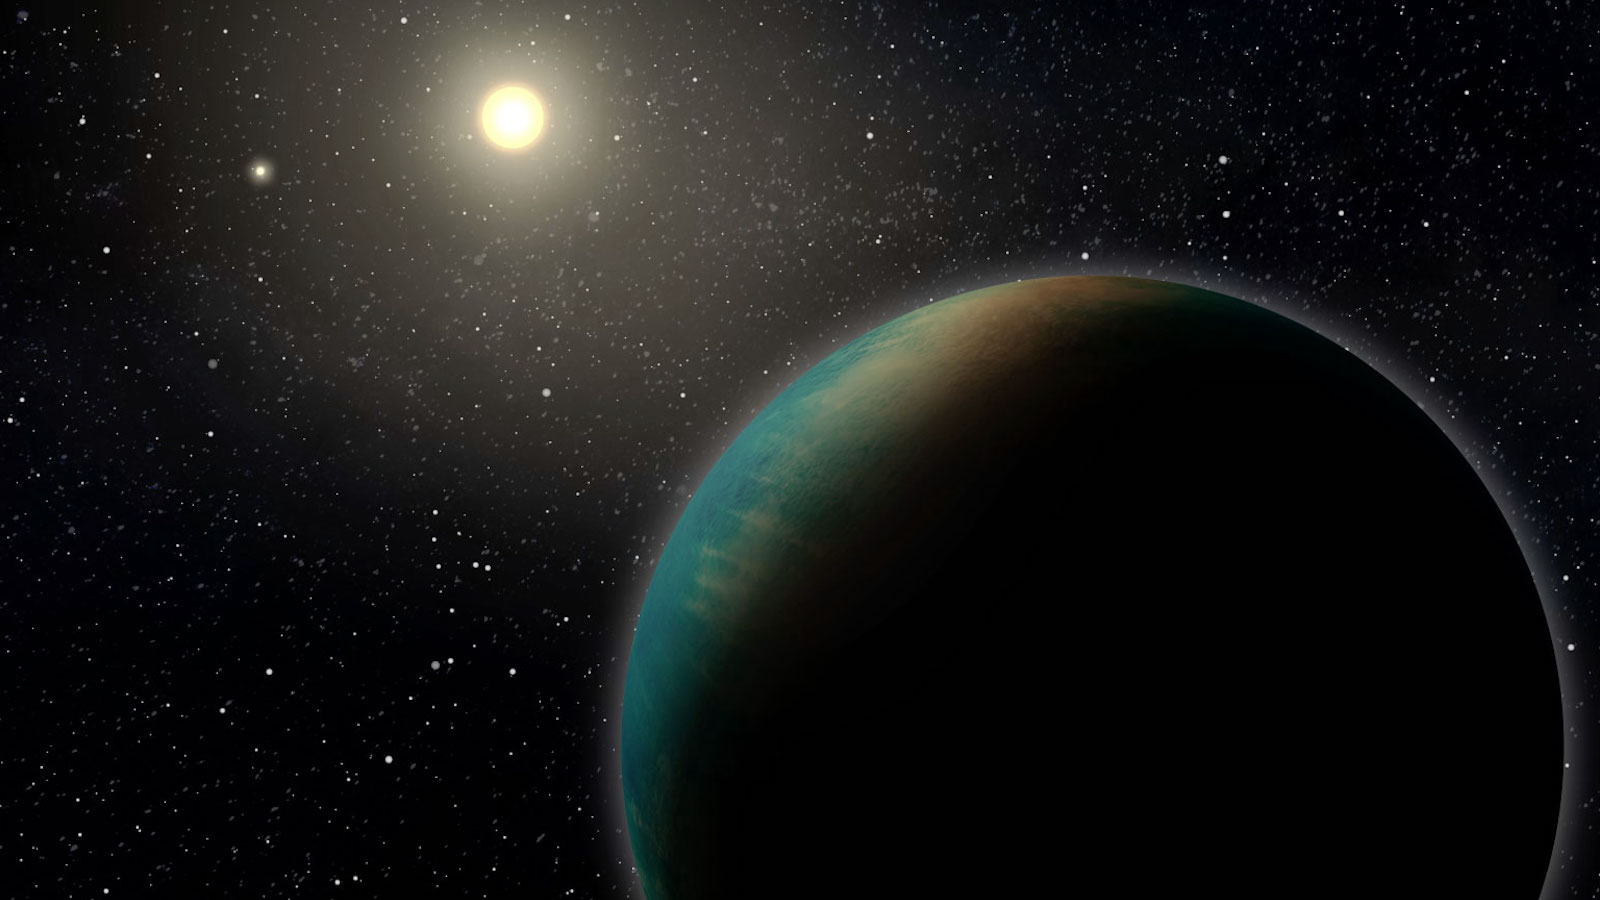 slide 4 - Artist's rendering of planet TOI-1452 b, as it might appear from space if it turns out to be an ocean world.